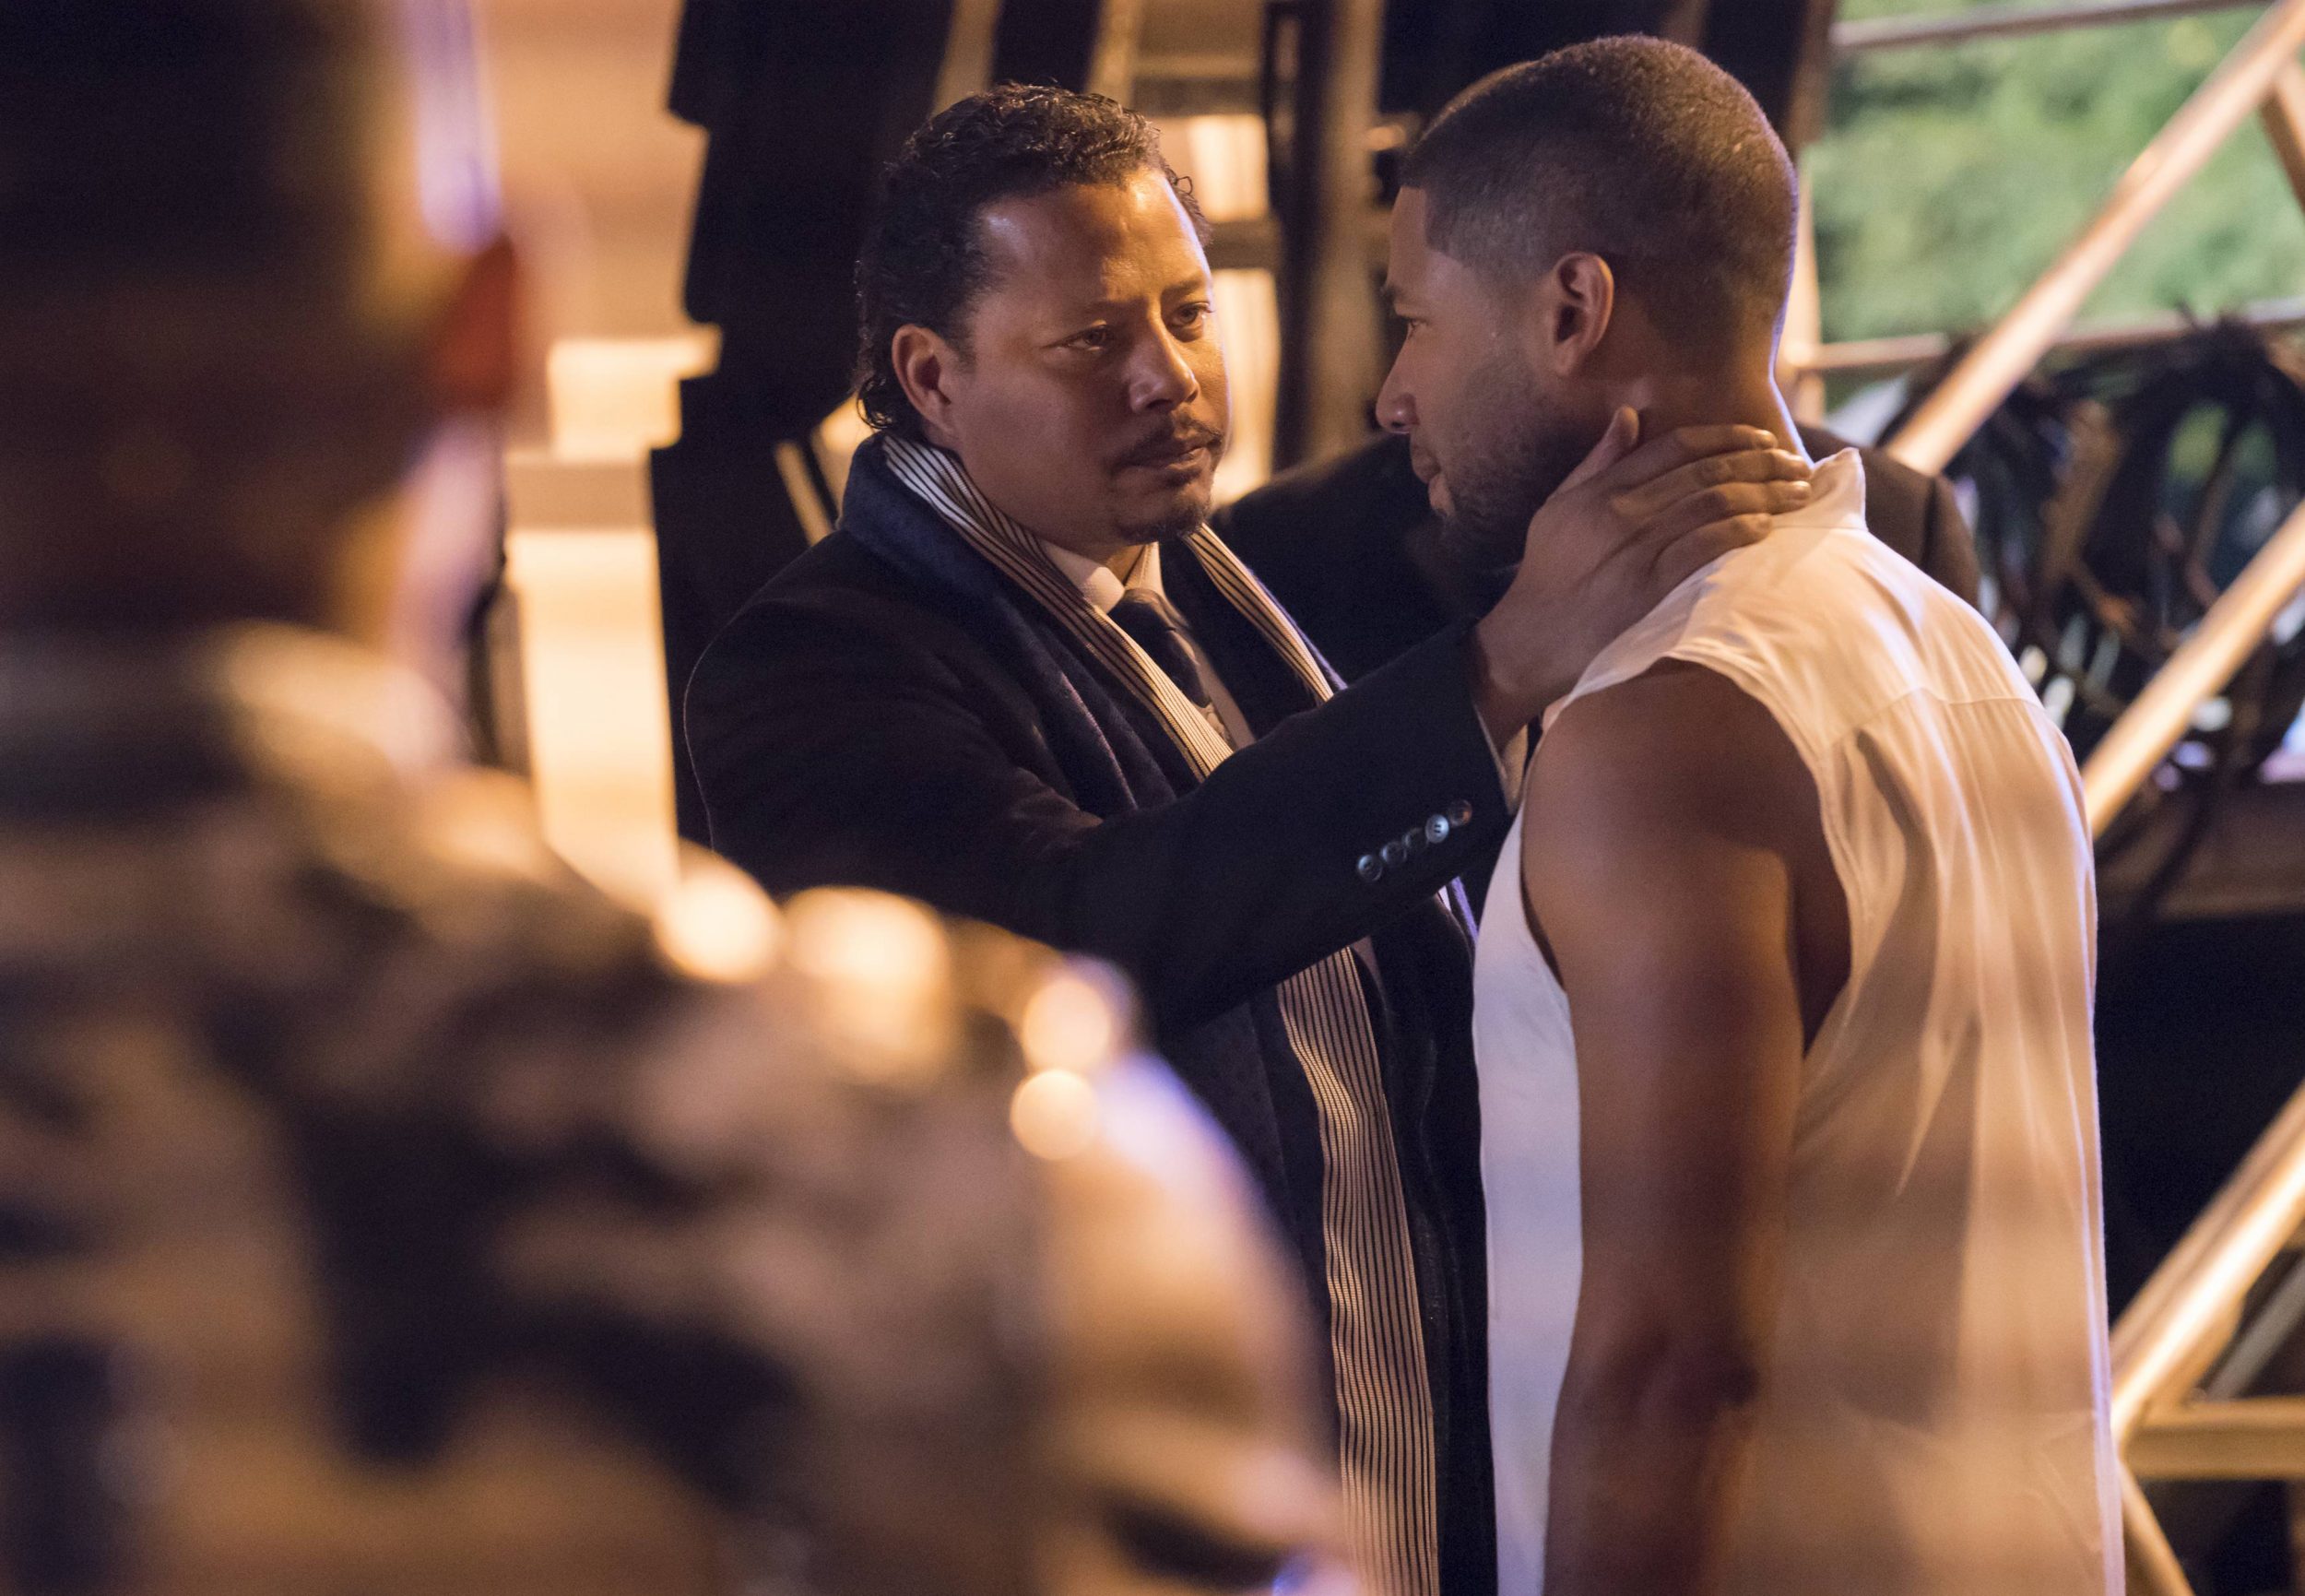 EMPIRE: Pictured L-R: Terrence Howard and Jussie Smollett in the "A Furnace For your Foe" fall finale episode of EMPIRE airing Dec. 14 (8:00-9:00 PM ET/PT) on FOX. ©2016 Fox Broadcasting Co. CR: Chuck Hodes/FOX